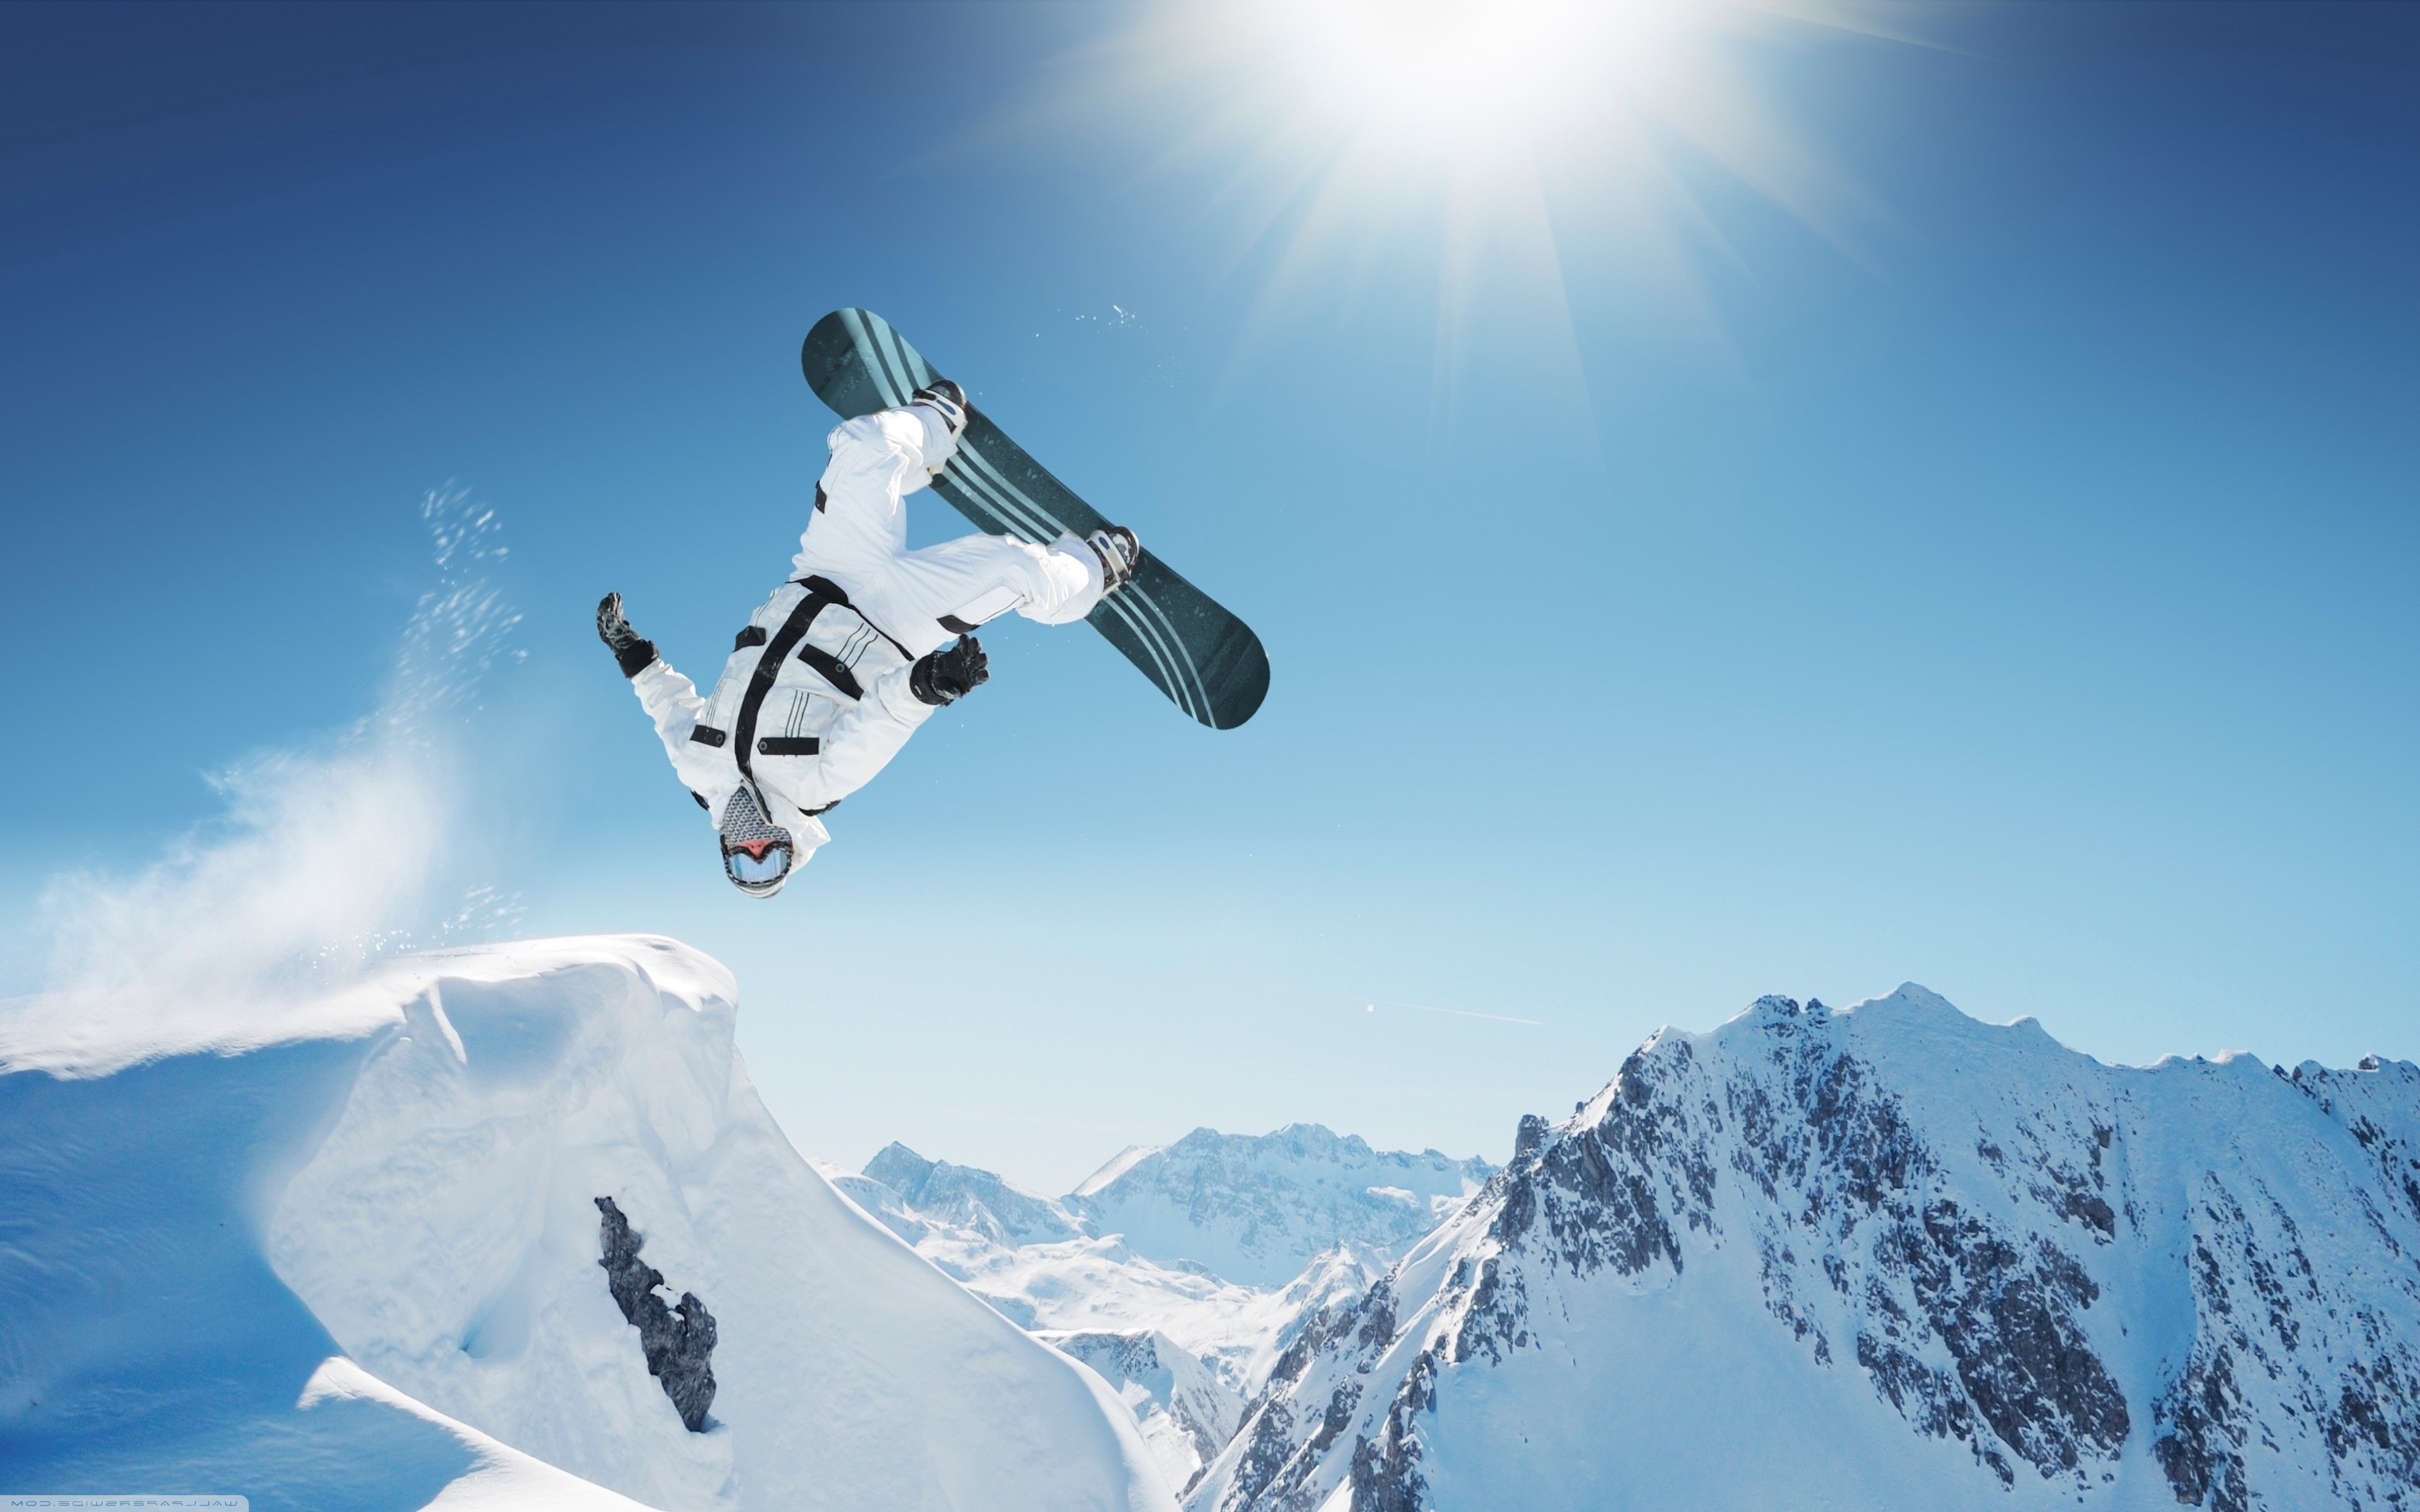 Snowboarding Wallpaper Image Photos Pictures Background